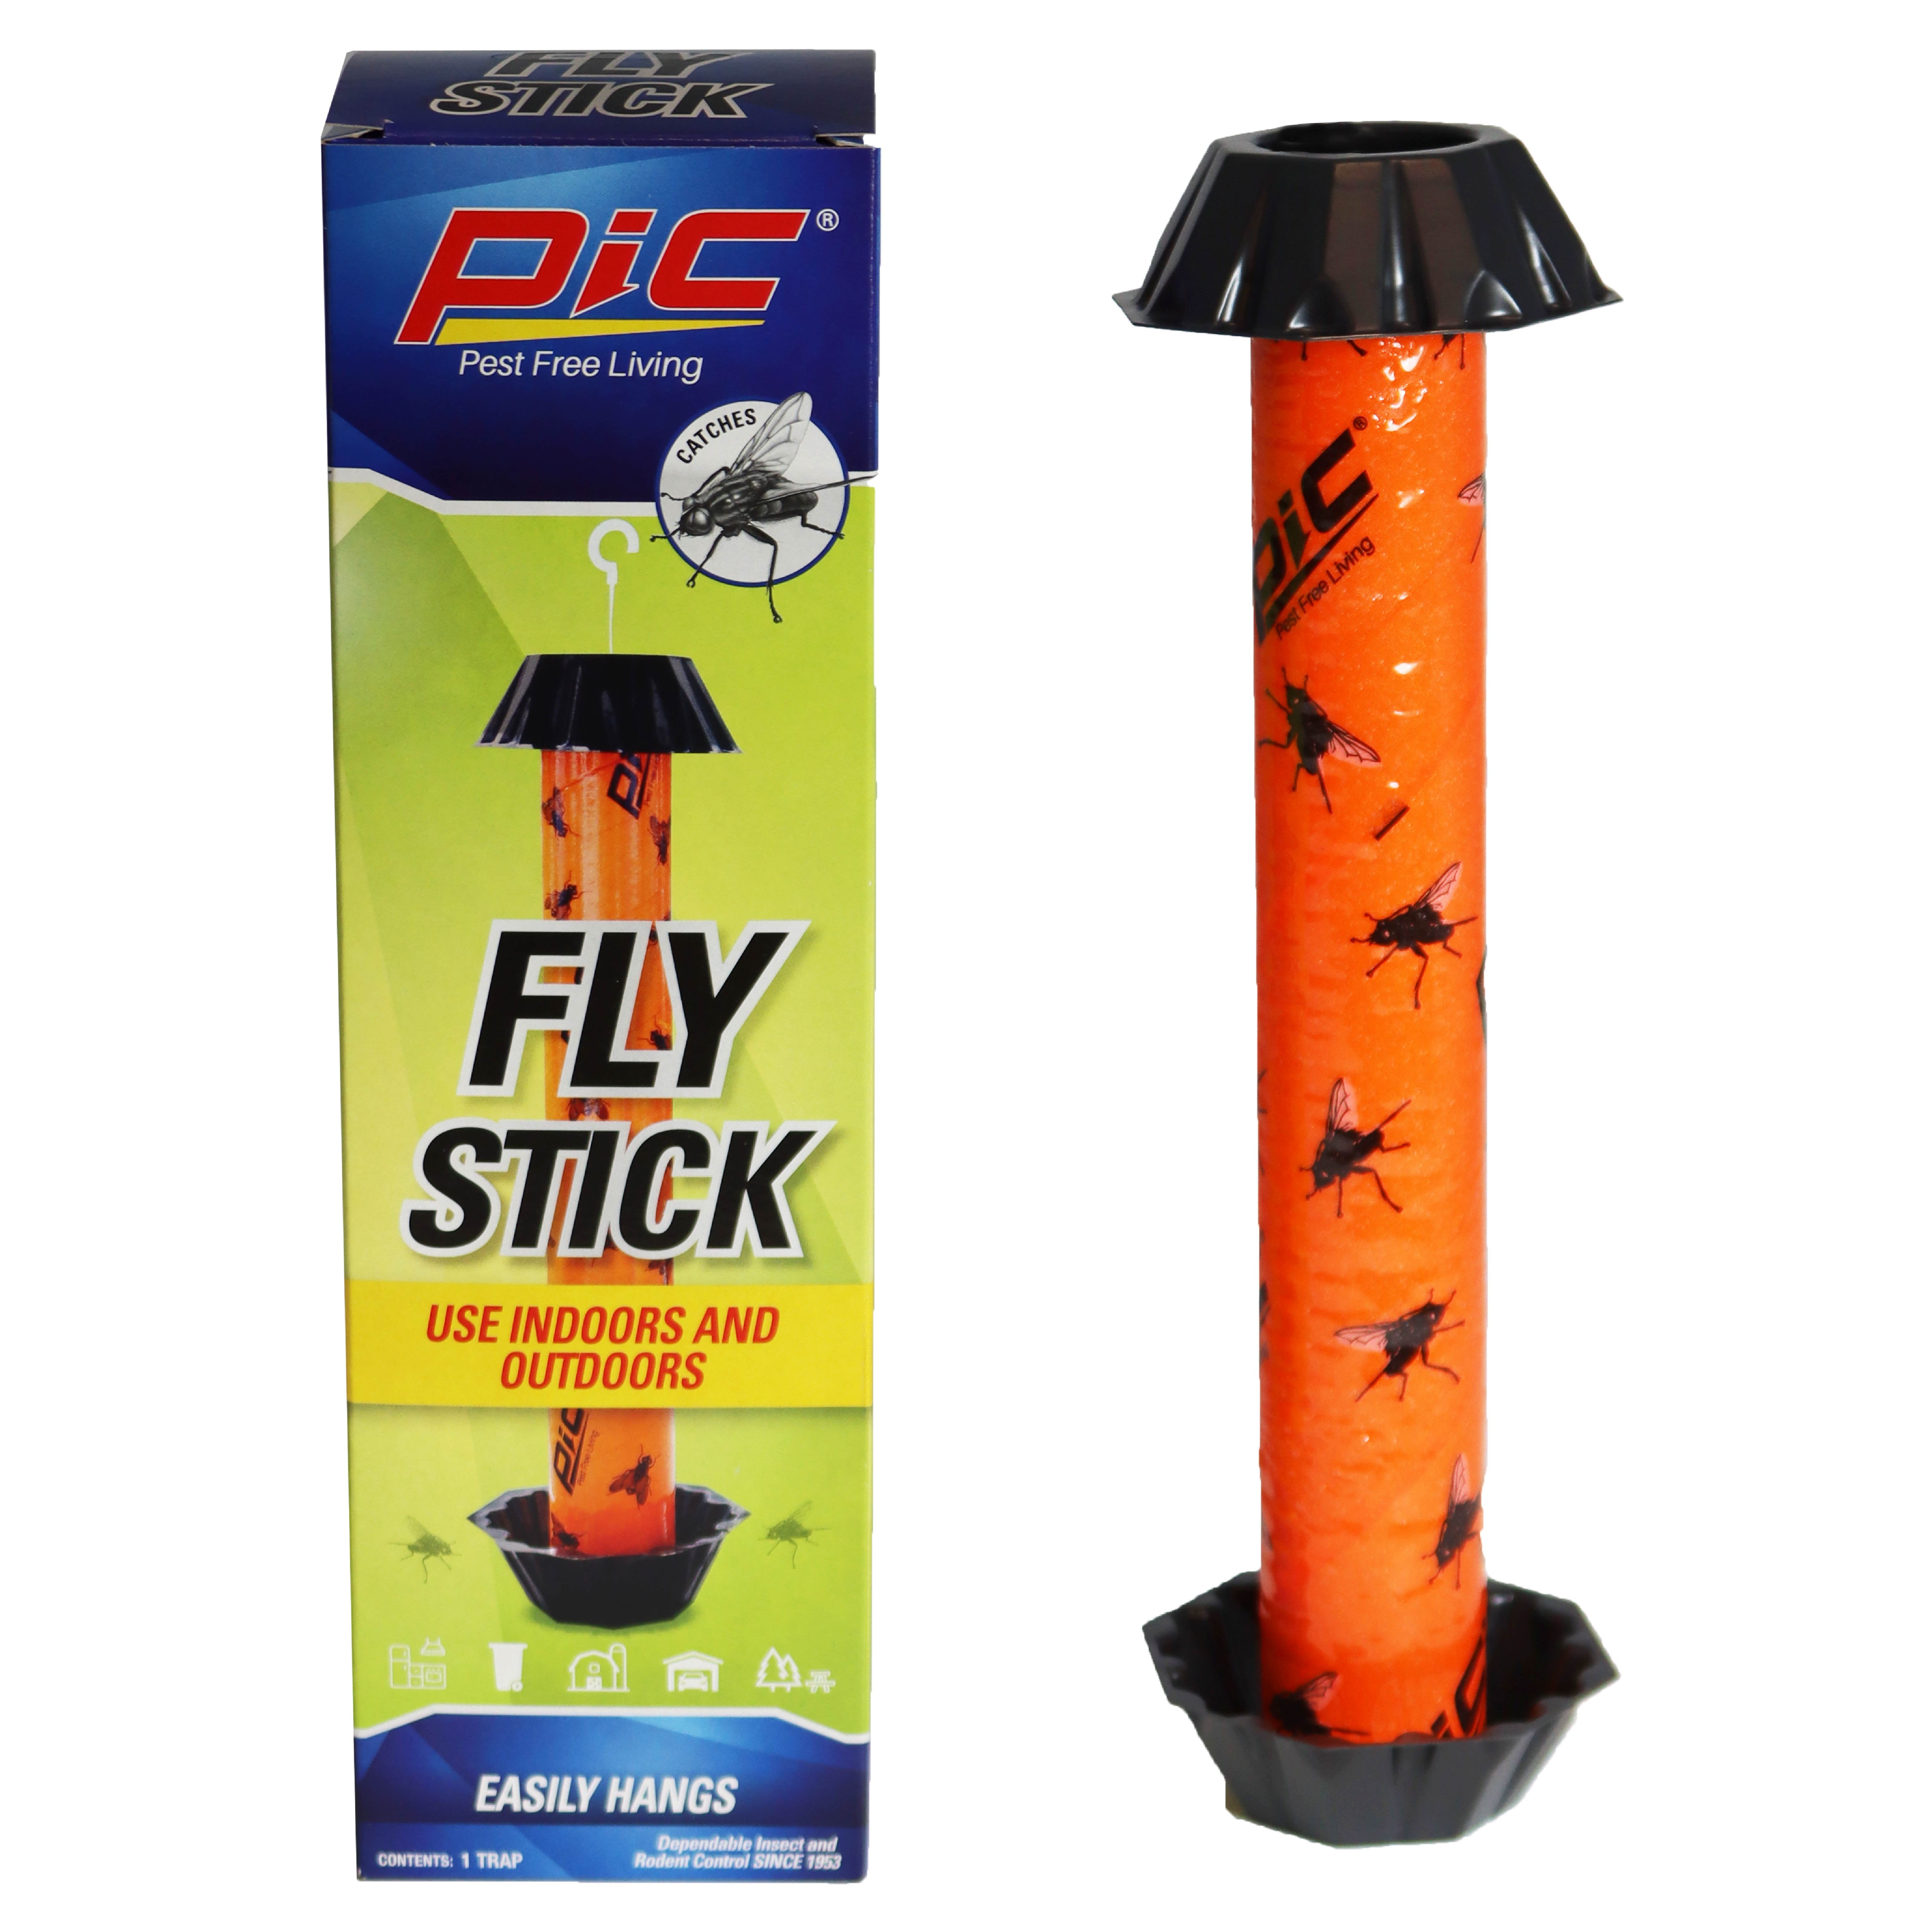 PIC Jumbo Fly Stick with Gold Lure for Indoor or Outdoor Use - Traps Flies  